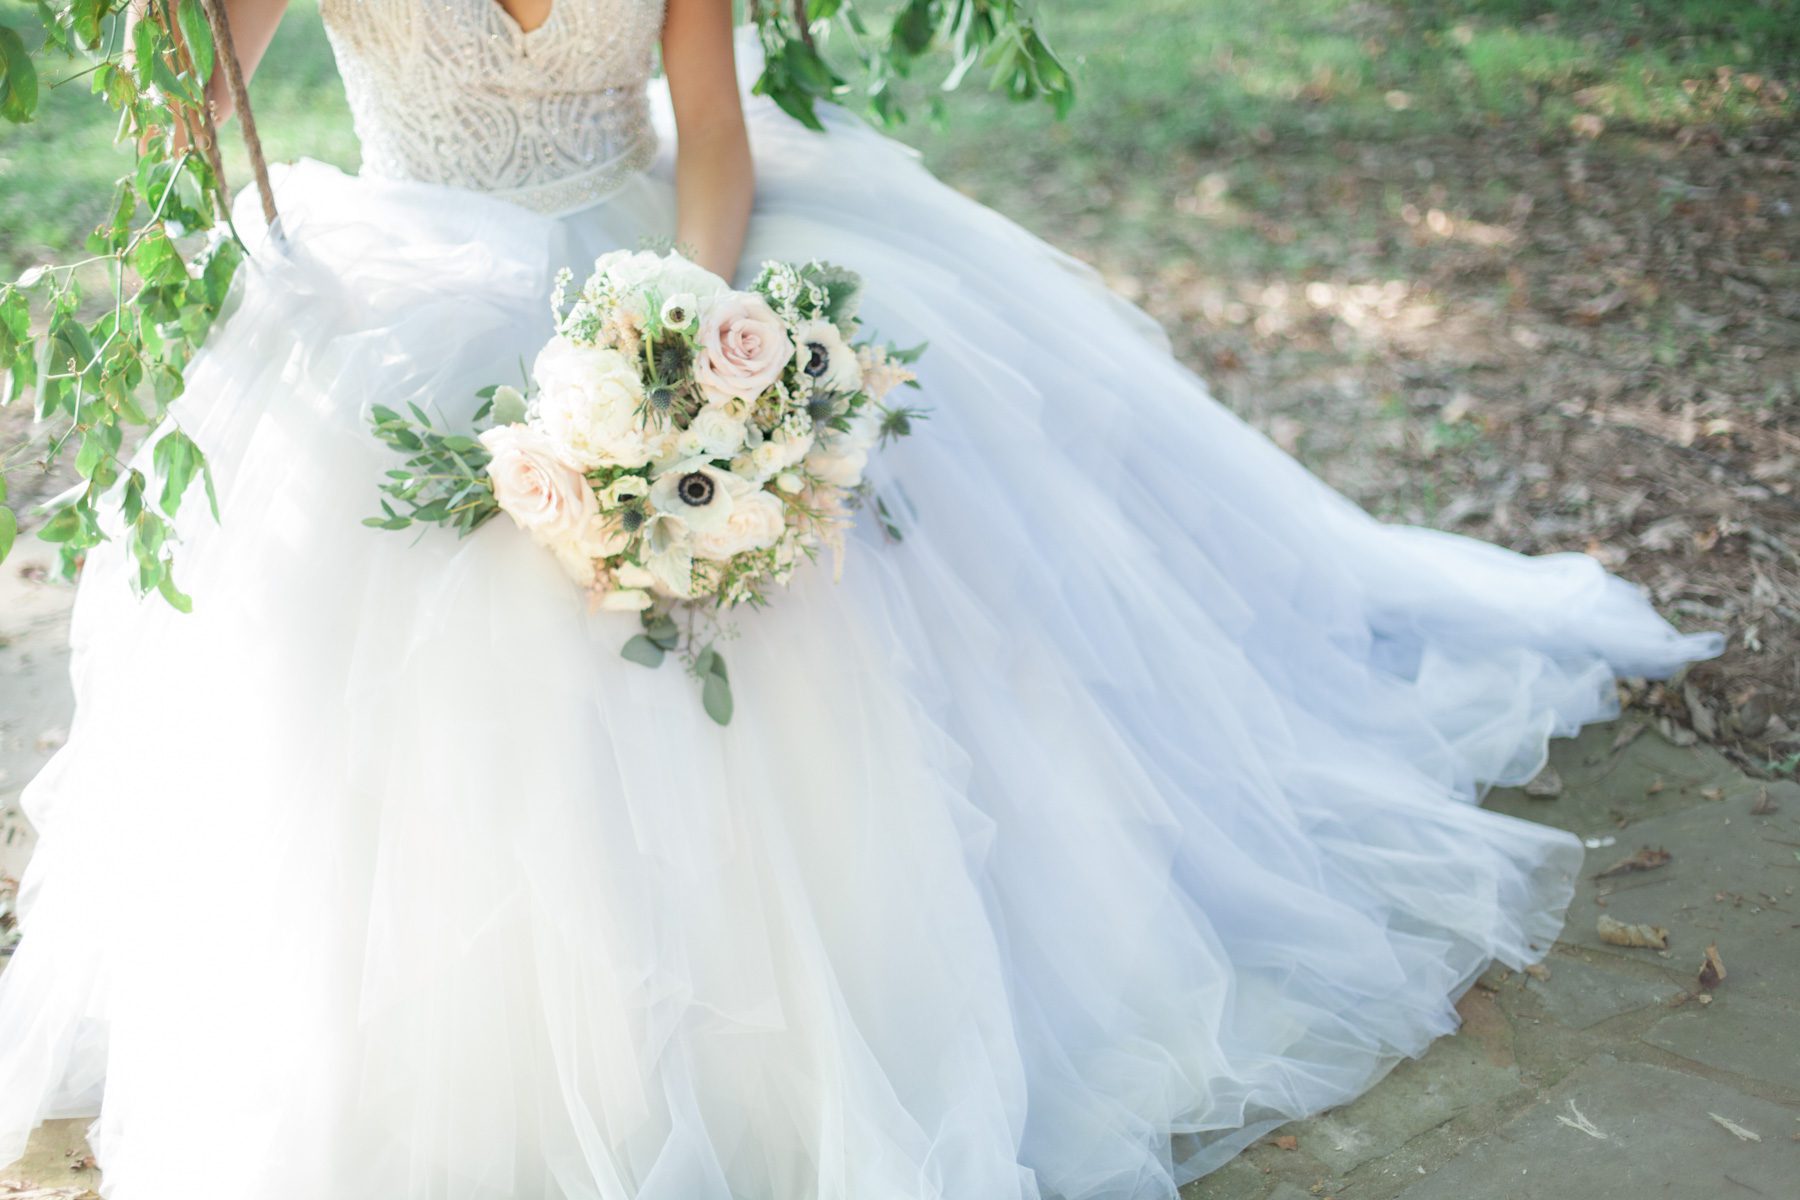 Bride's dress and flowers on swing. Wedding photography at Cedarwood Weddings and Estate in Nashville, TN photography by Krista Lee Photography